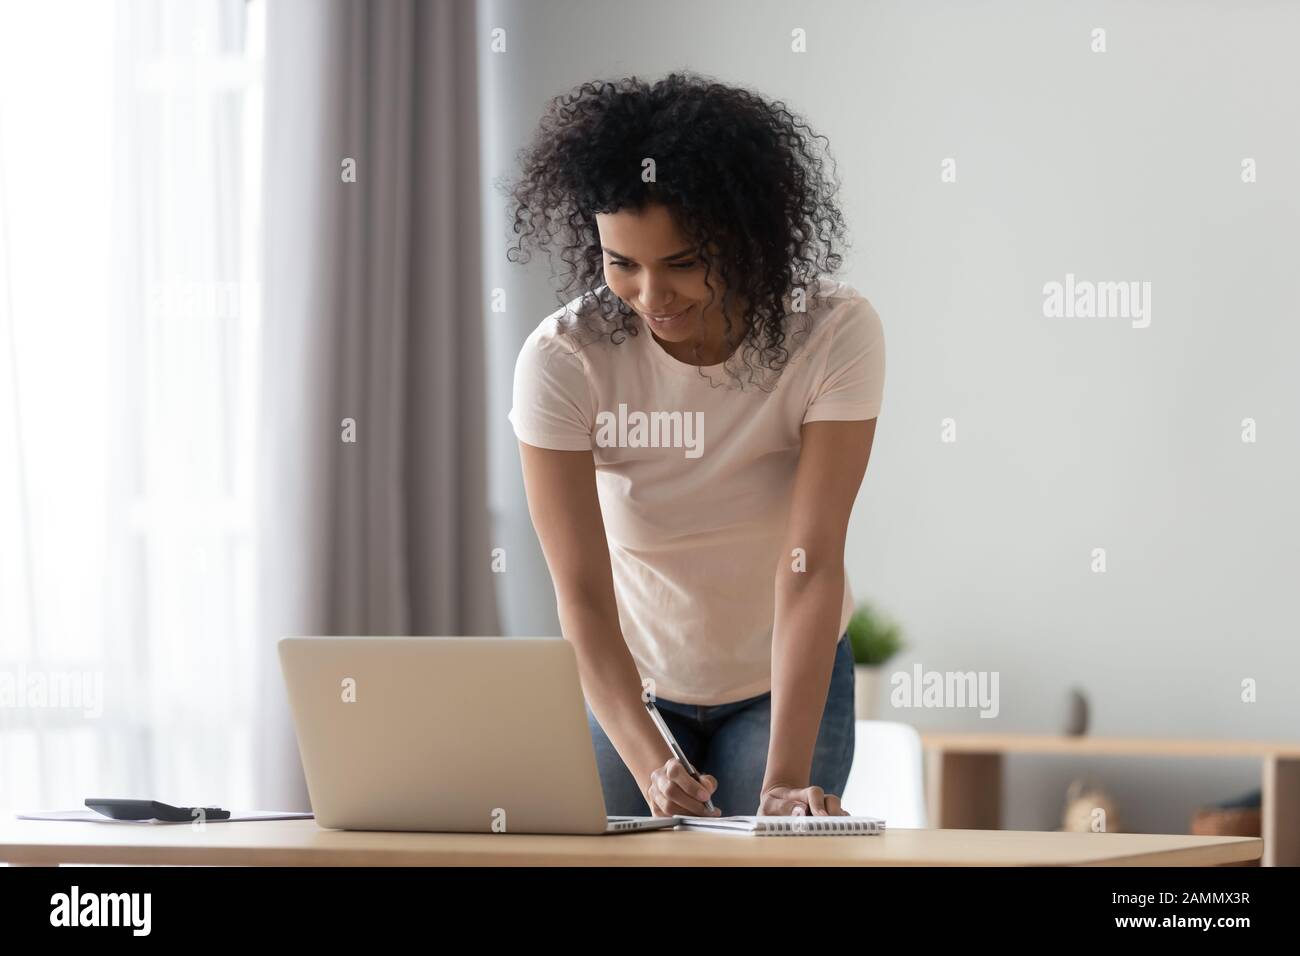 African woman looking at computer writing down useful important information Stock Photo